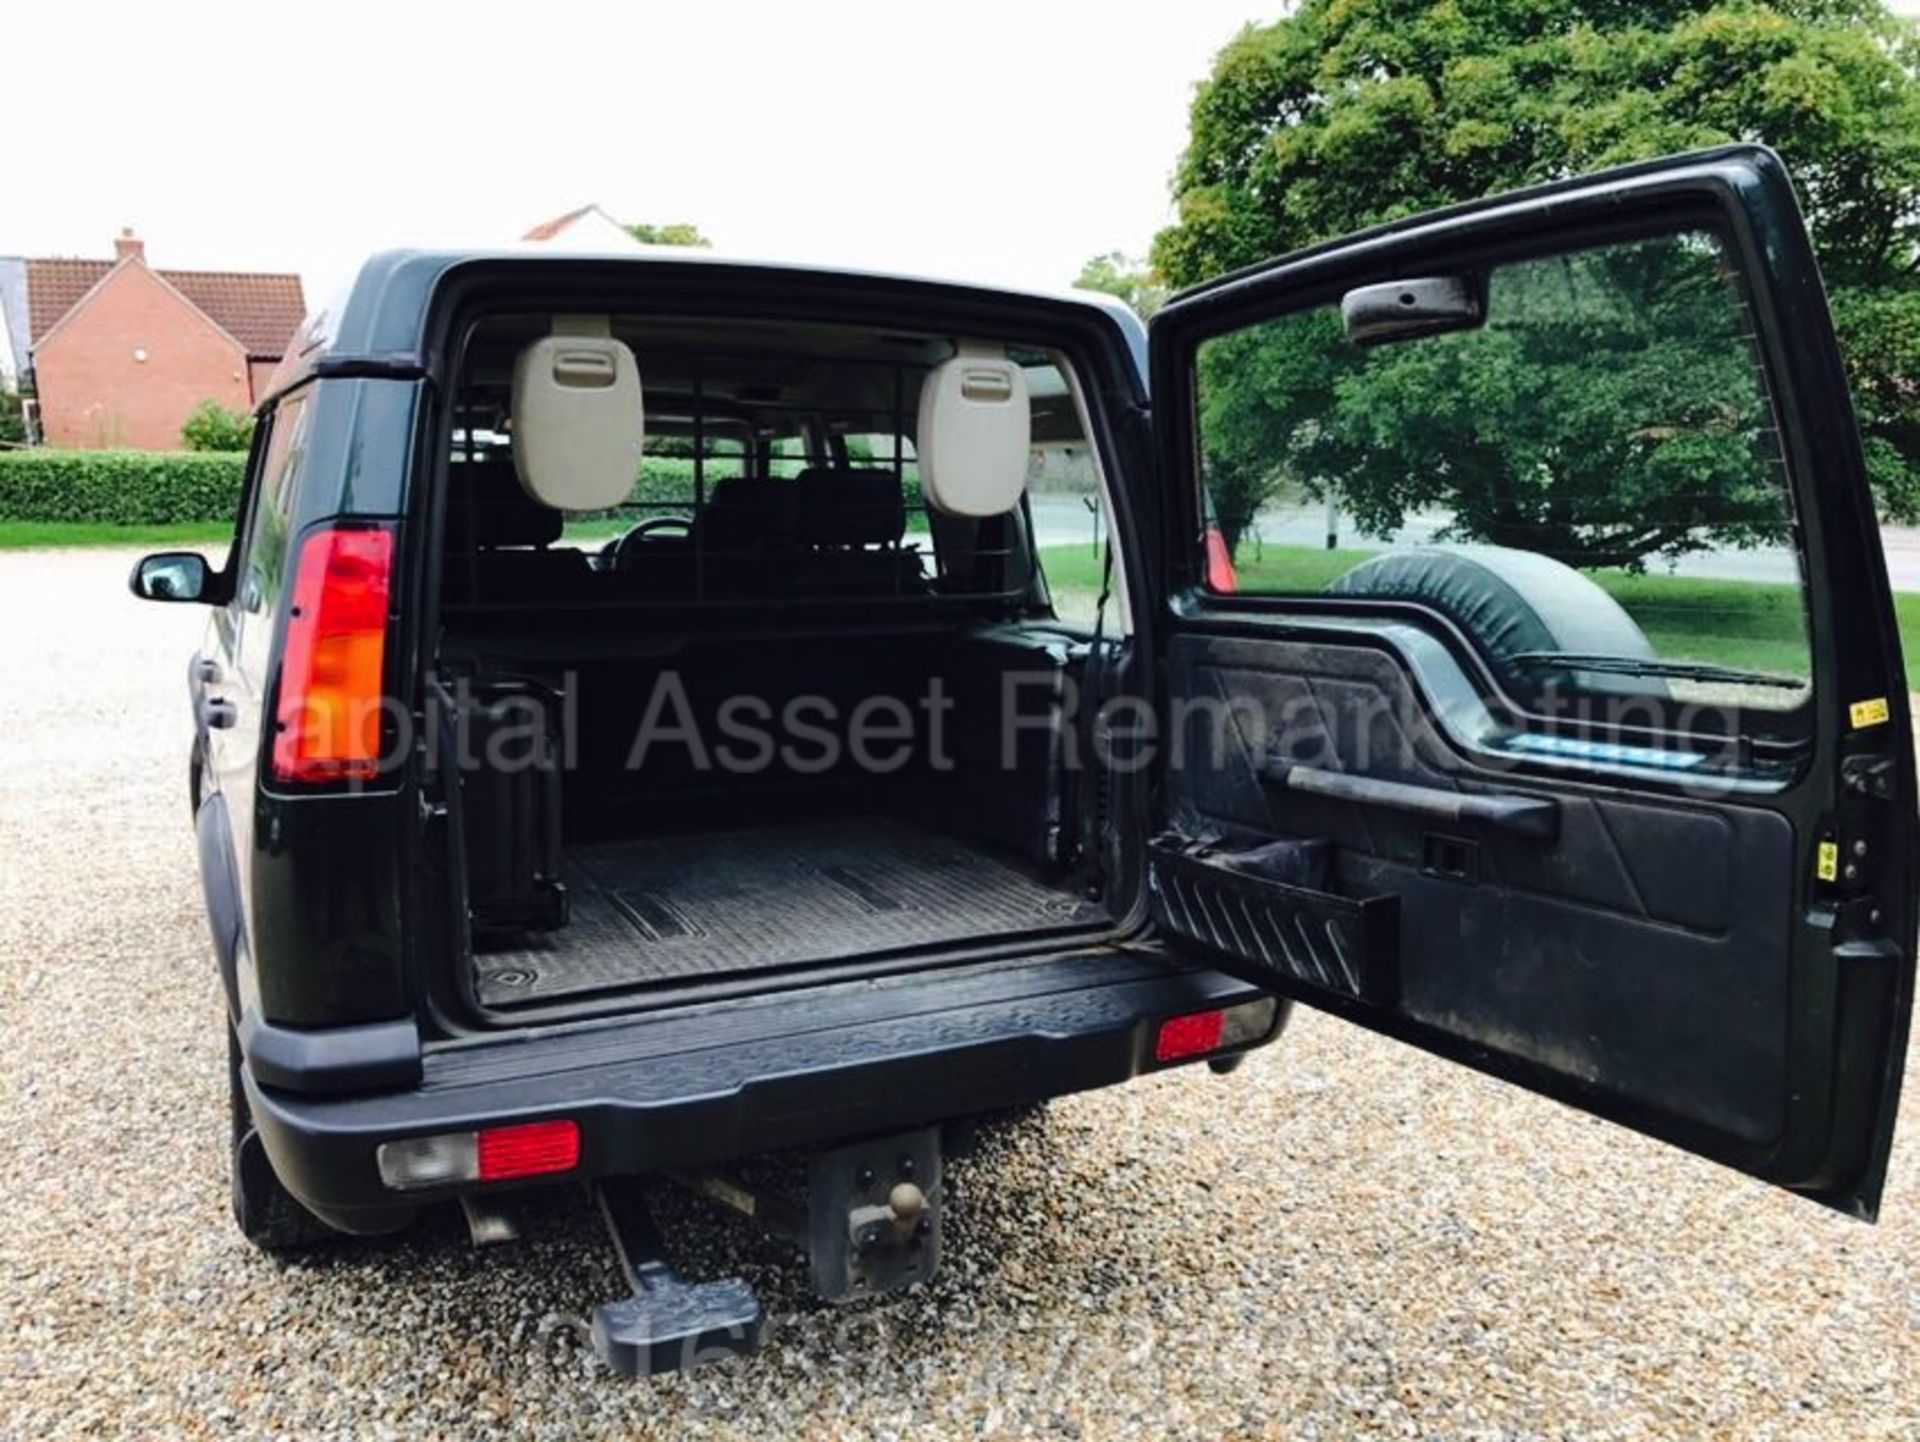 (On Sale) LAND ROVER DISCOVERY (2003 - 03 REG) 'TD5 DIESEL - 7 SEATER' (NO VAT - SAVE 20%) - Image 7 of 15